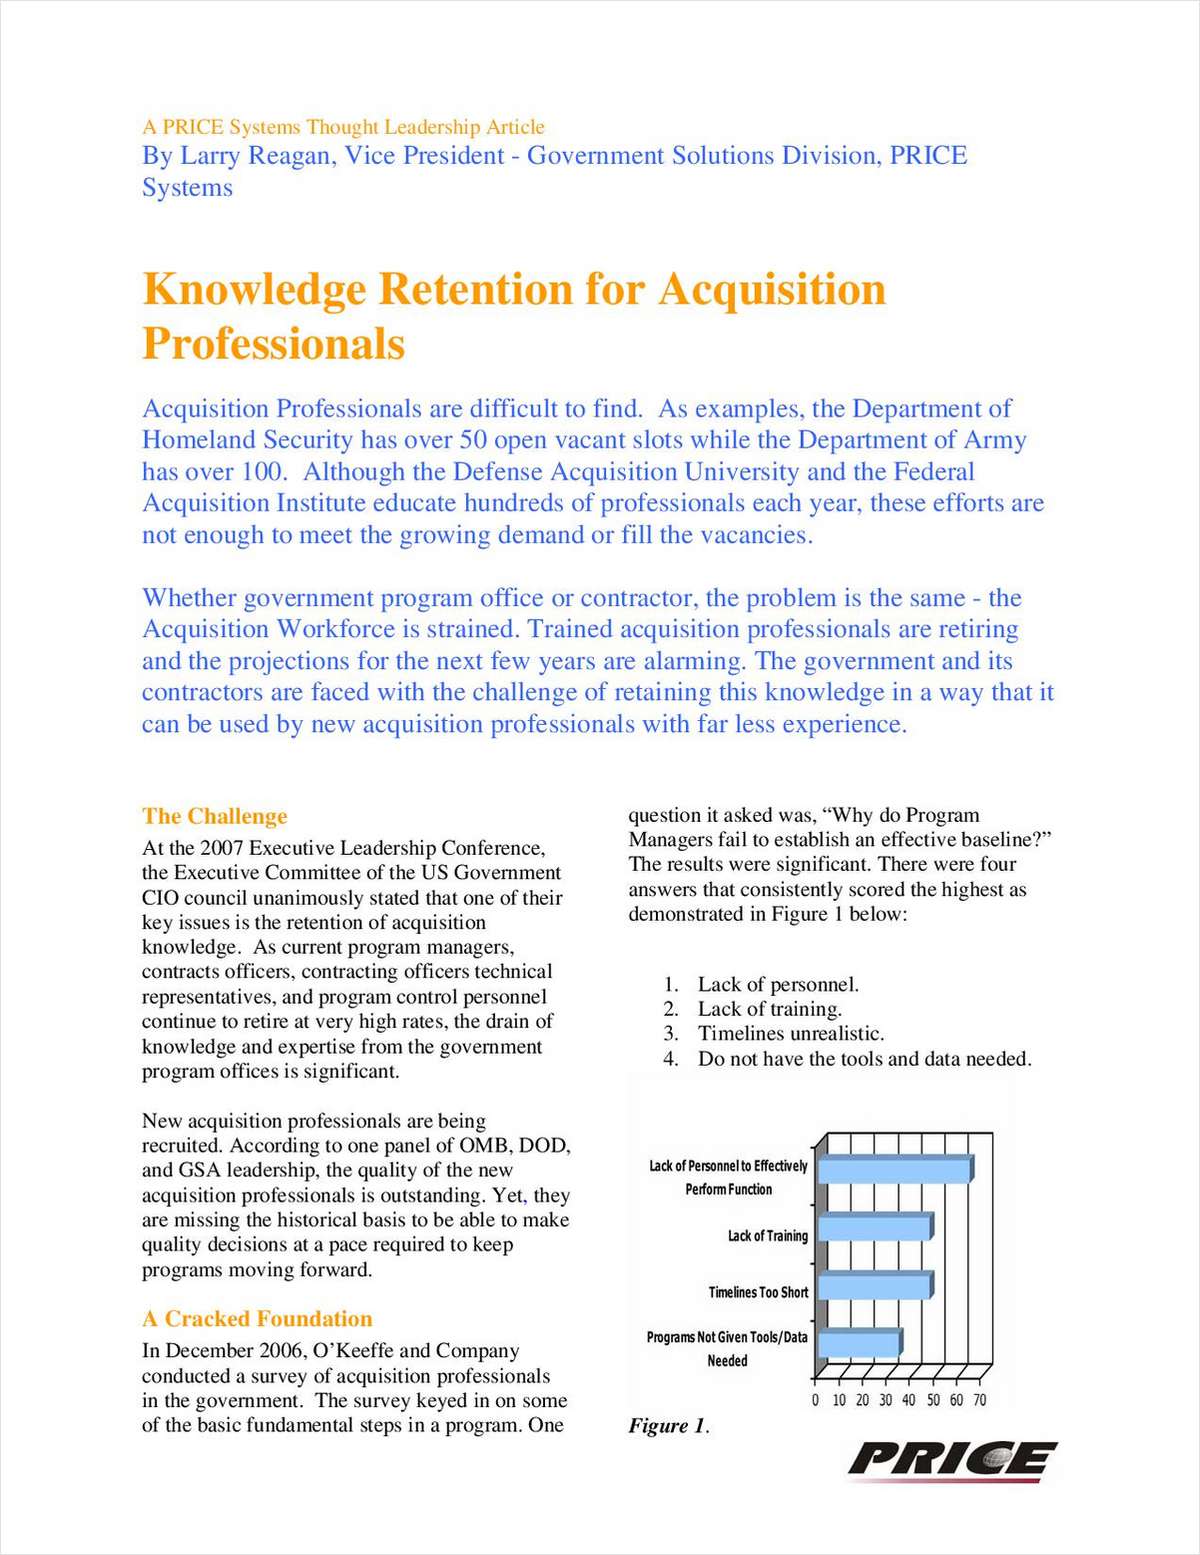 Knowledge Retention for Acquisition Professionals